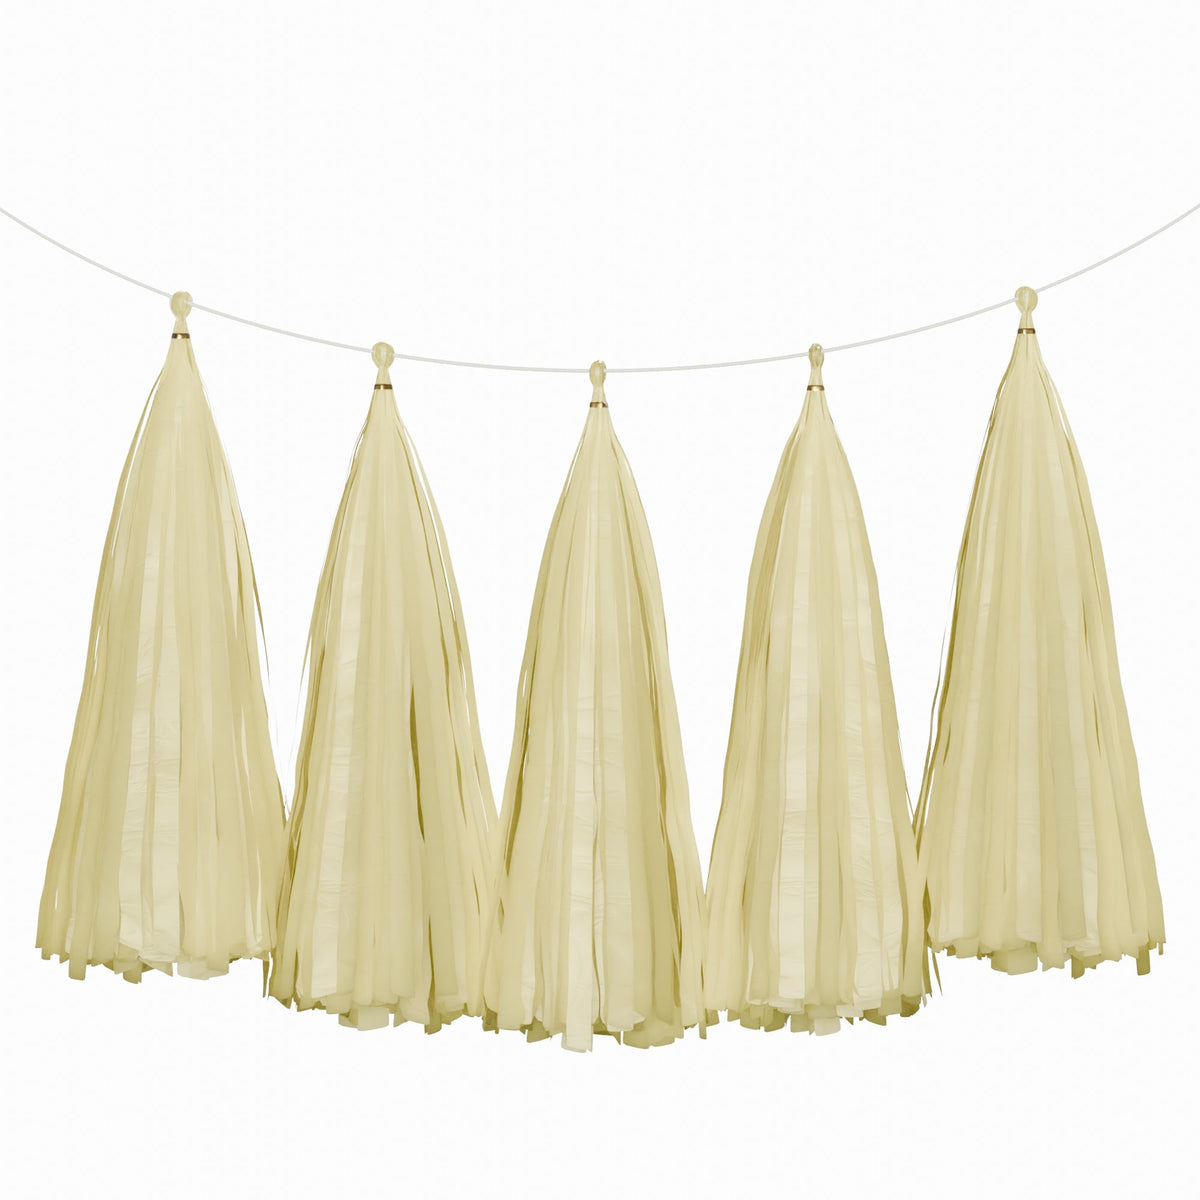 Weifang Mayshine Imp&exp co Decorations Cream Tassel Garland, 5 Count 810064197154